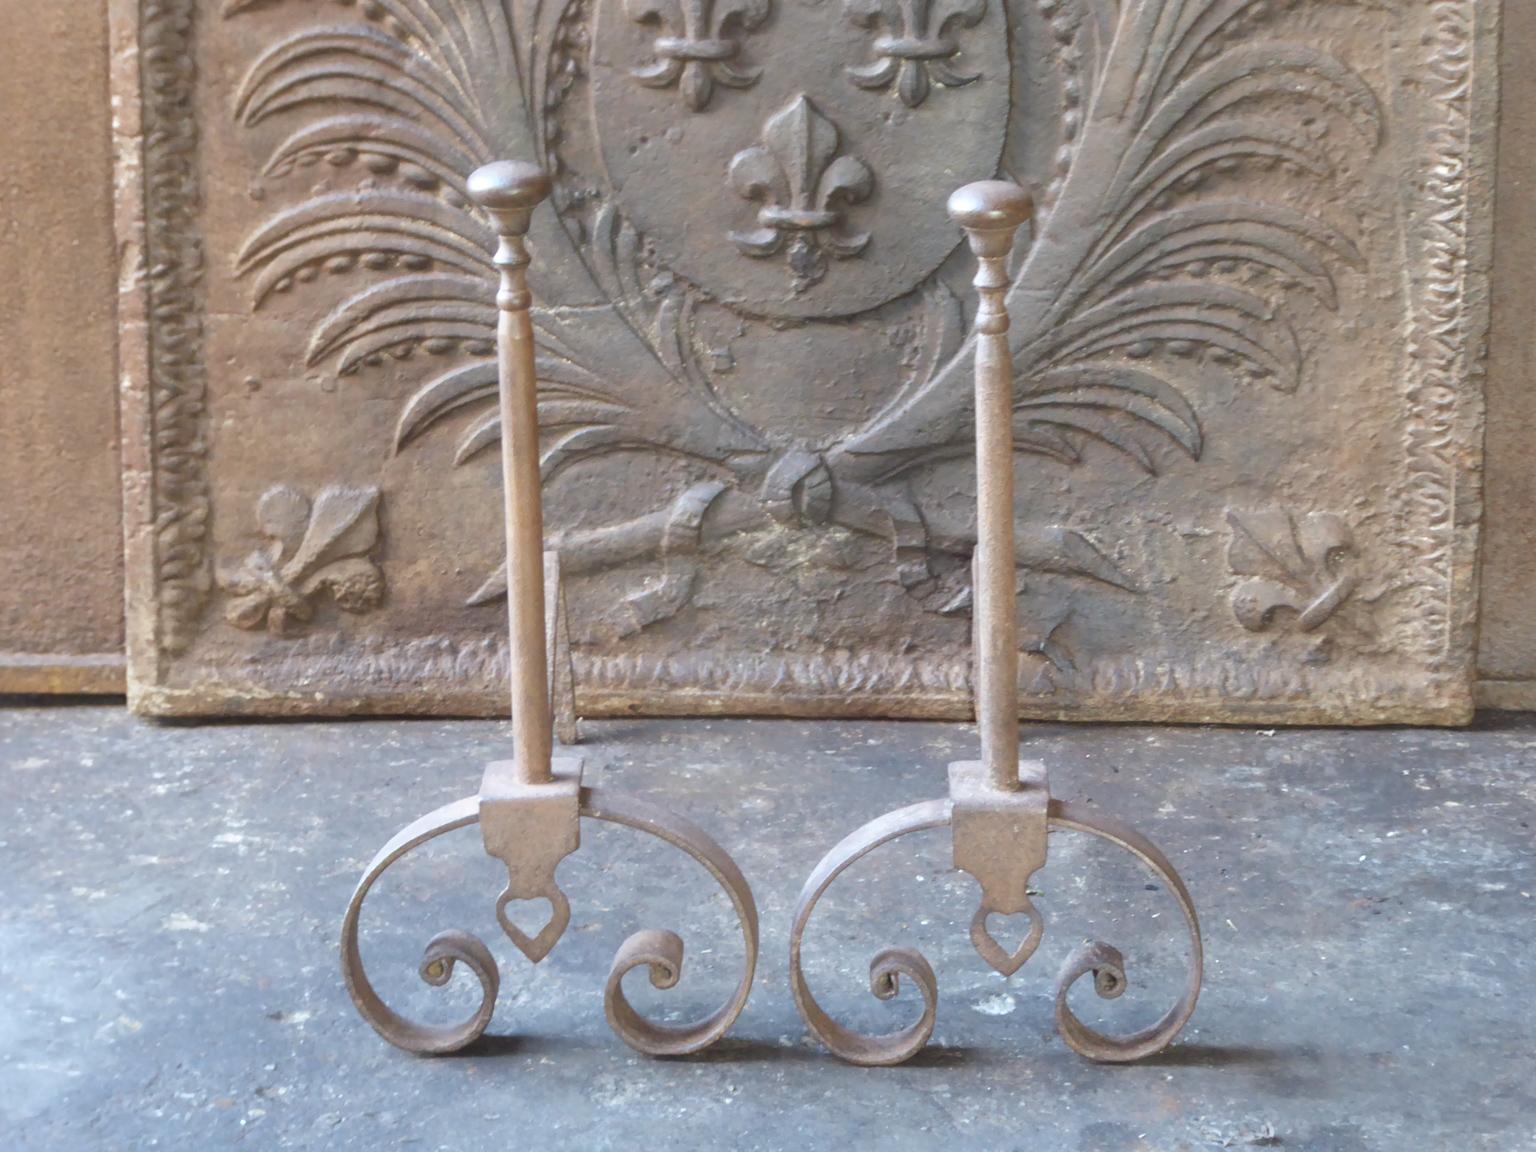 19th-20th century French Napoleon III style andirons made of wrought iron. The andirons are in a good condition.